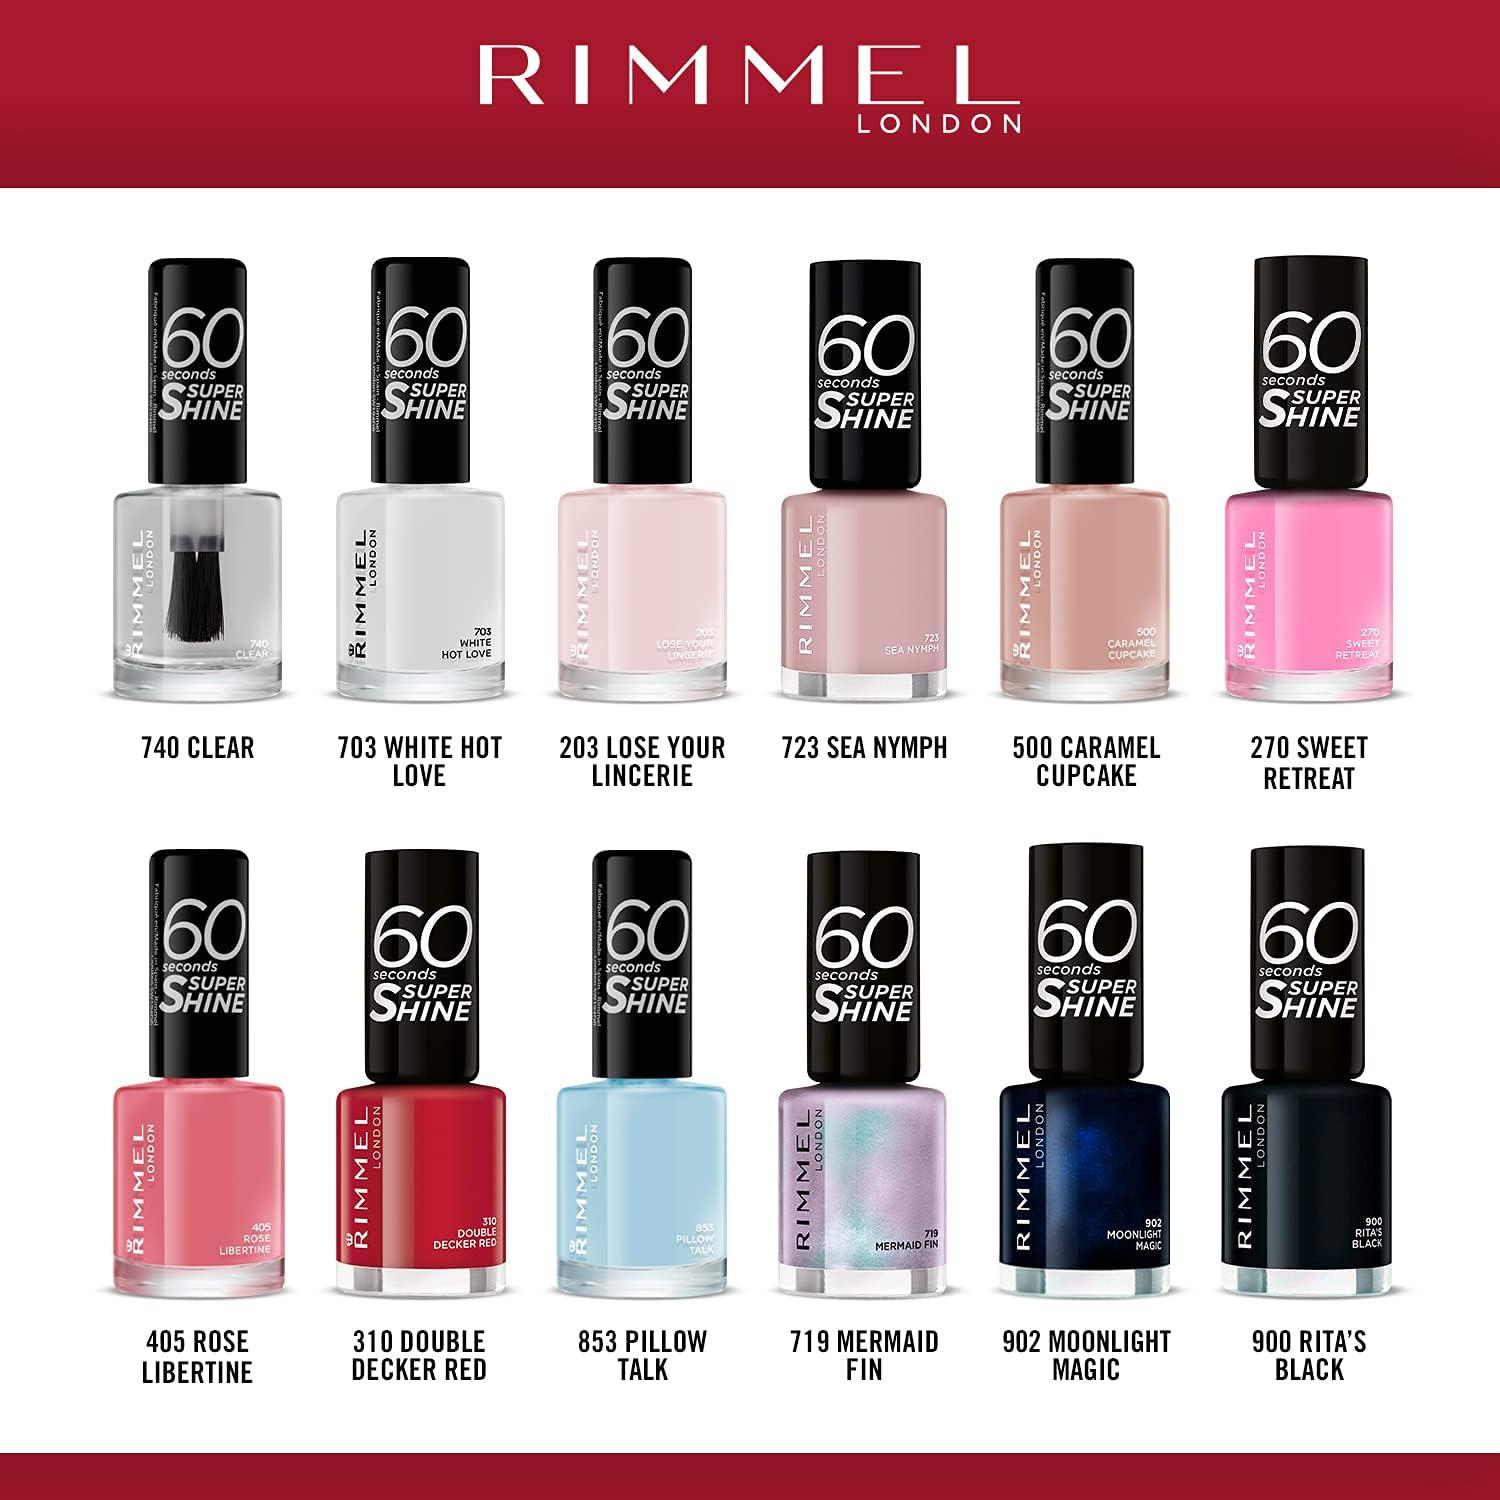 RIMMEL LONDON - 60 Seconds Super Shine Nail Polish Set - Super Glossy, Ultra  Shiny Finish - Precise One Stroke Application - Up To 10 Days Wear - High  Impact Colour - 12 Assorted Shades : : Beauty